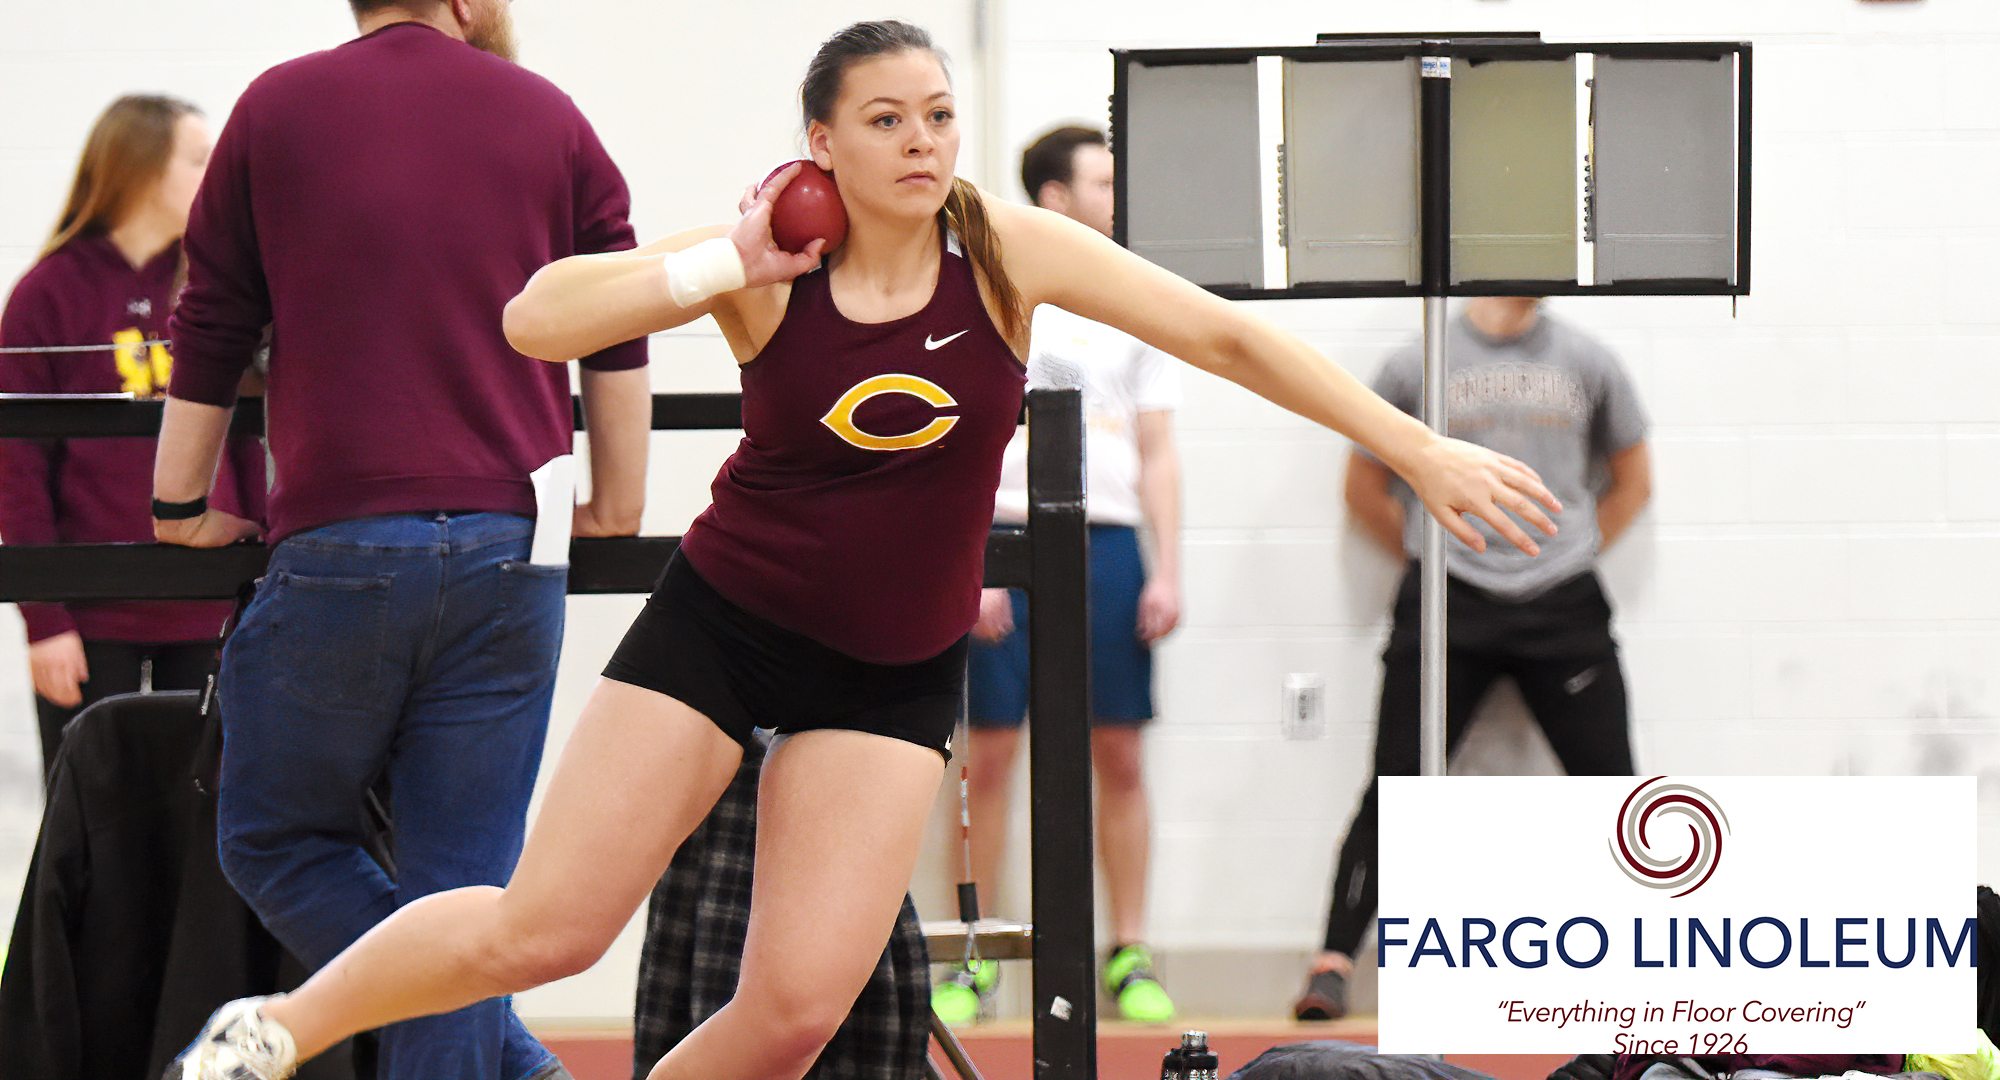 Junior Cayle Hovland won the shot put and was second in the weight throw in the season-opening NDSU Bison Open.